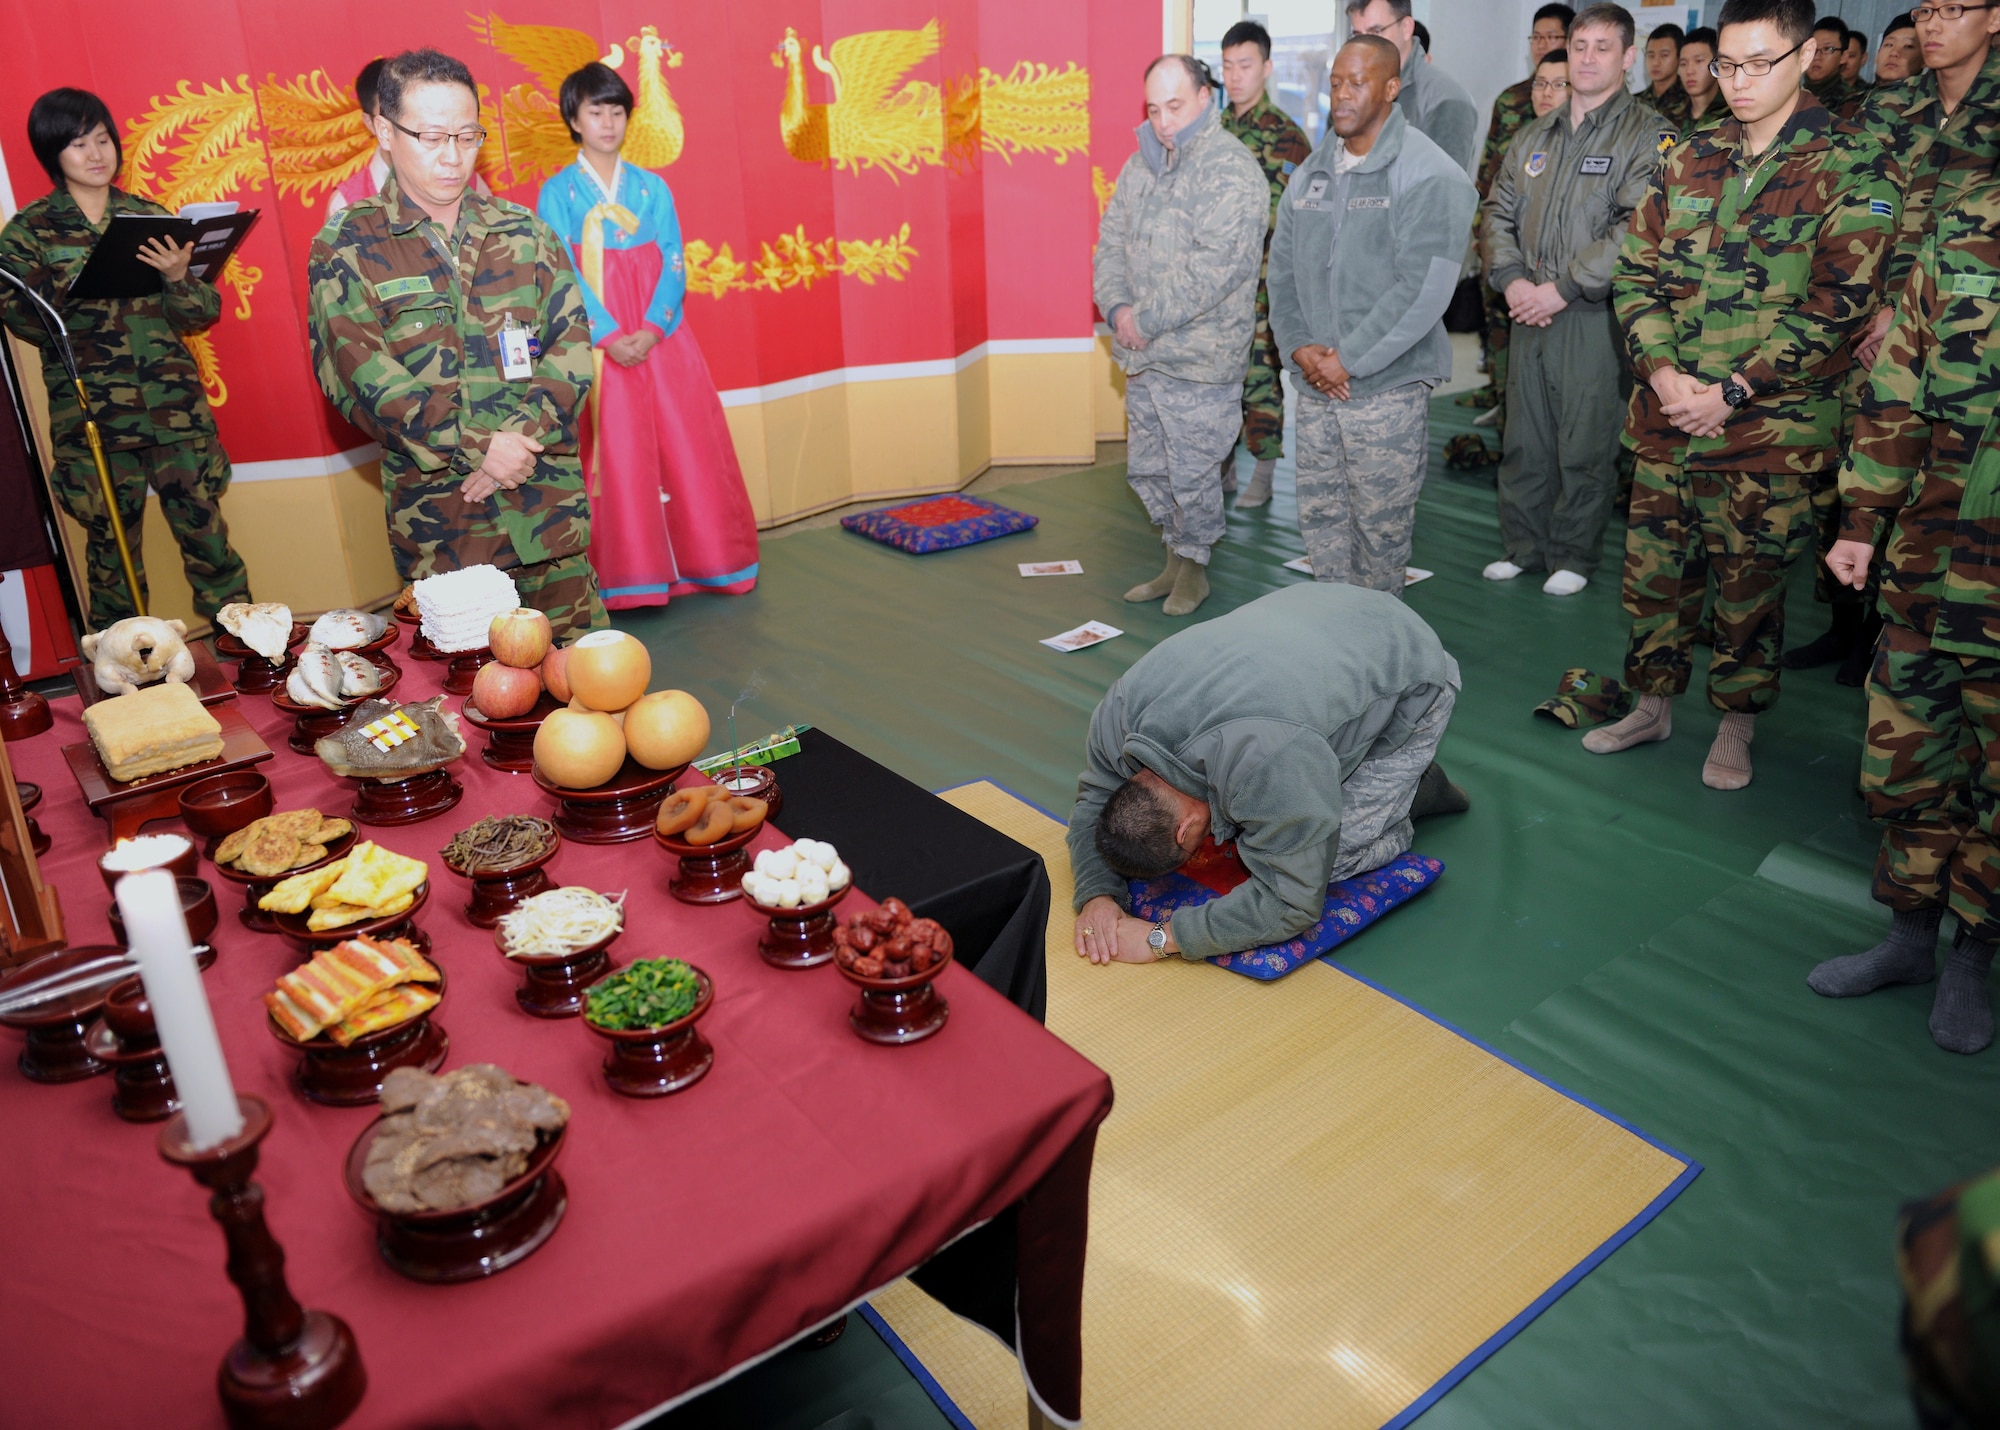 KUNSAN AIR BASE, Republic of Korea -- Col. Steven Caberto, 8th Medical Group commander, bows to ancestors during a memorial service held during a Lunar New Year ceremony in the Republic of Korea Air Force base exchange Feb. 3. The combined 8th Fighter Wing and ROKAF 38th Fighter Group ceremony included the memorial service, ceremonial bowing, a traditional Korean breakfast and traditional games. (U.S. Air Force photo/Senior Airman Ciara Wymbs)